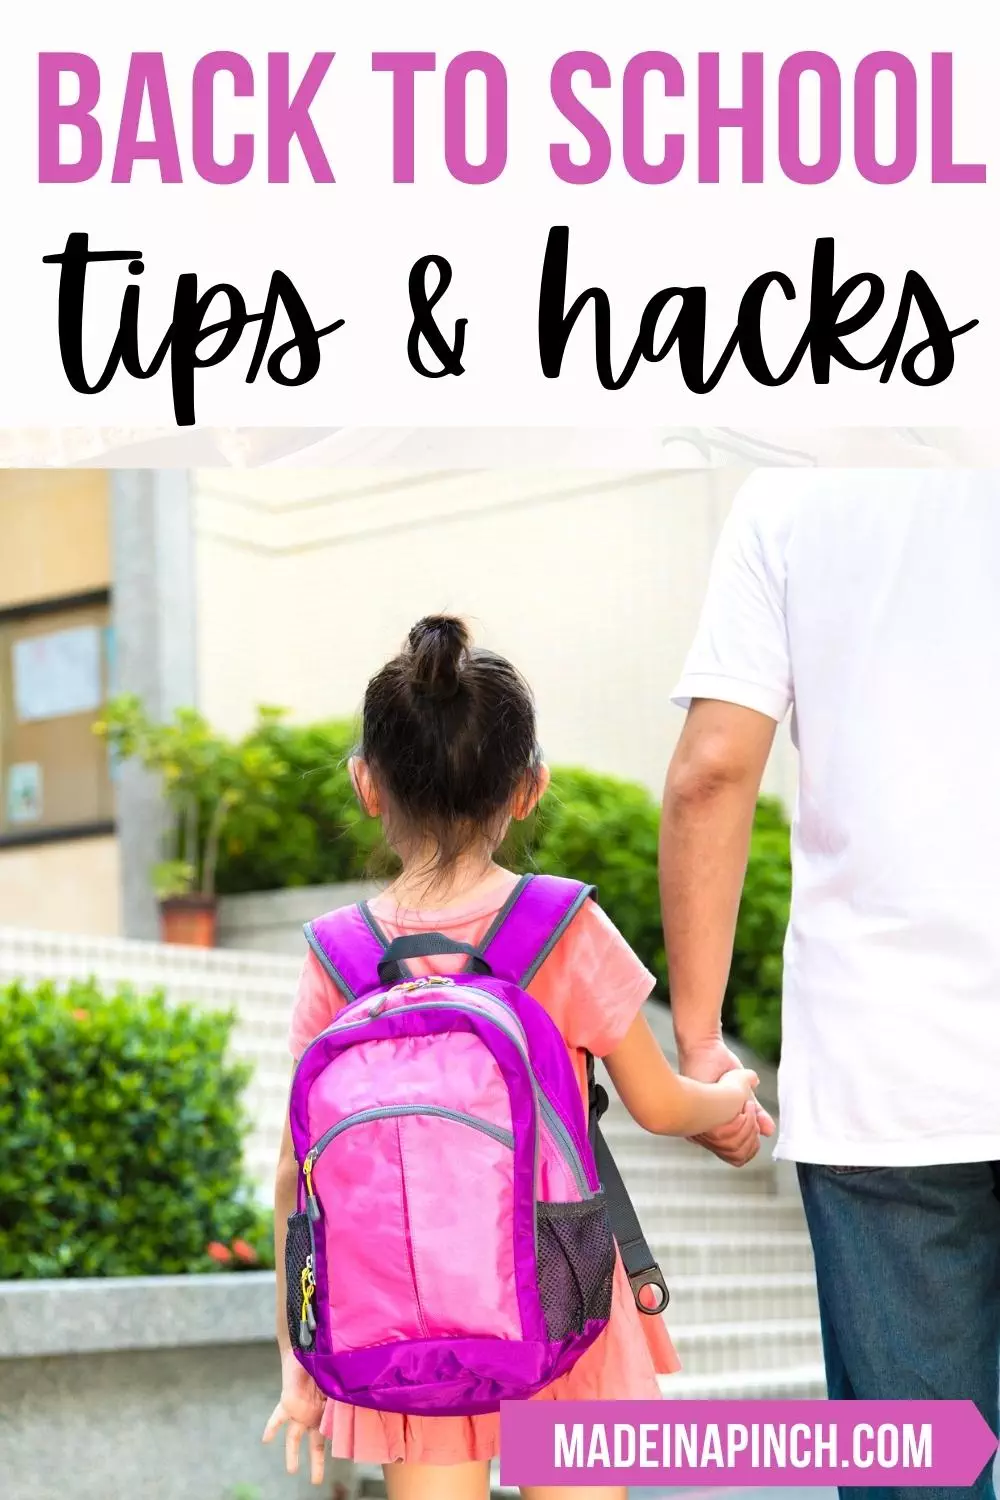 back-to-school preparation tips pin image